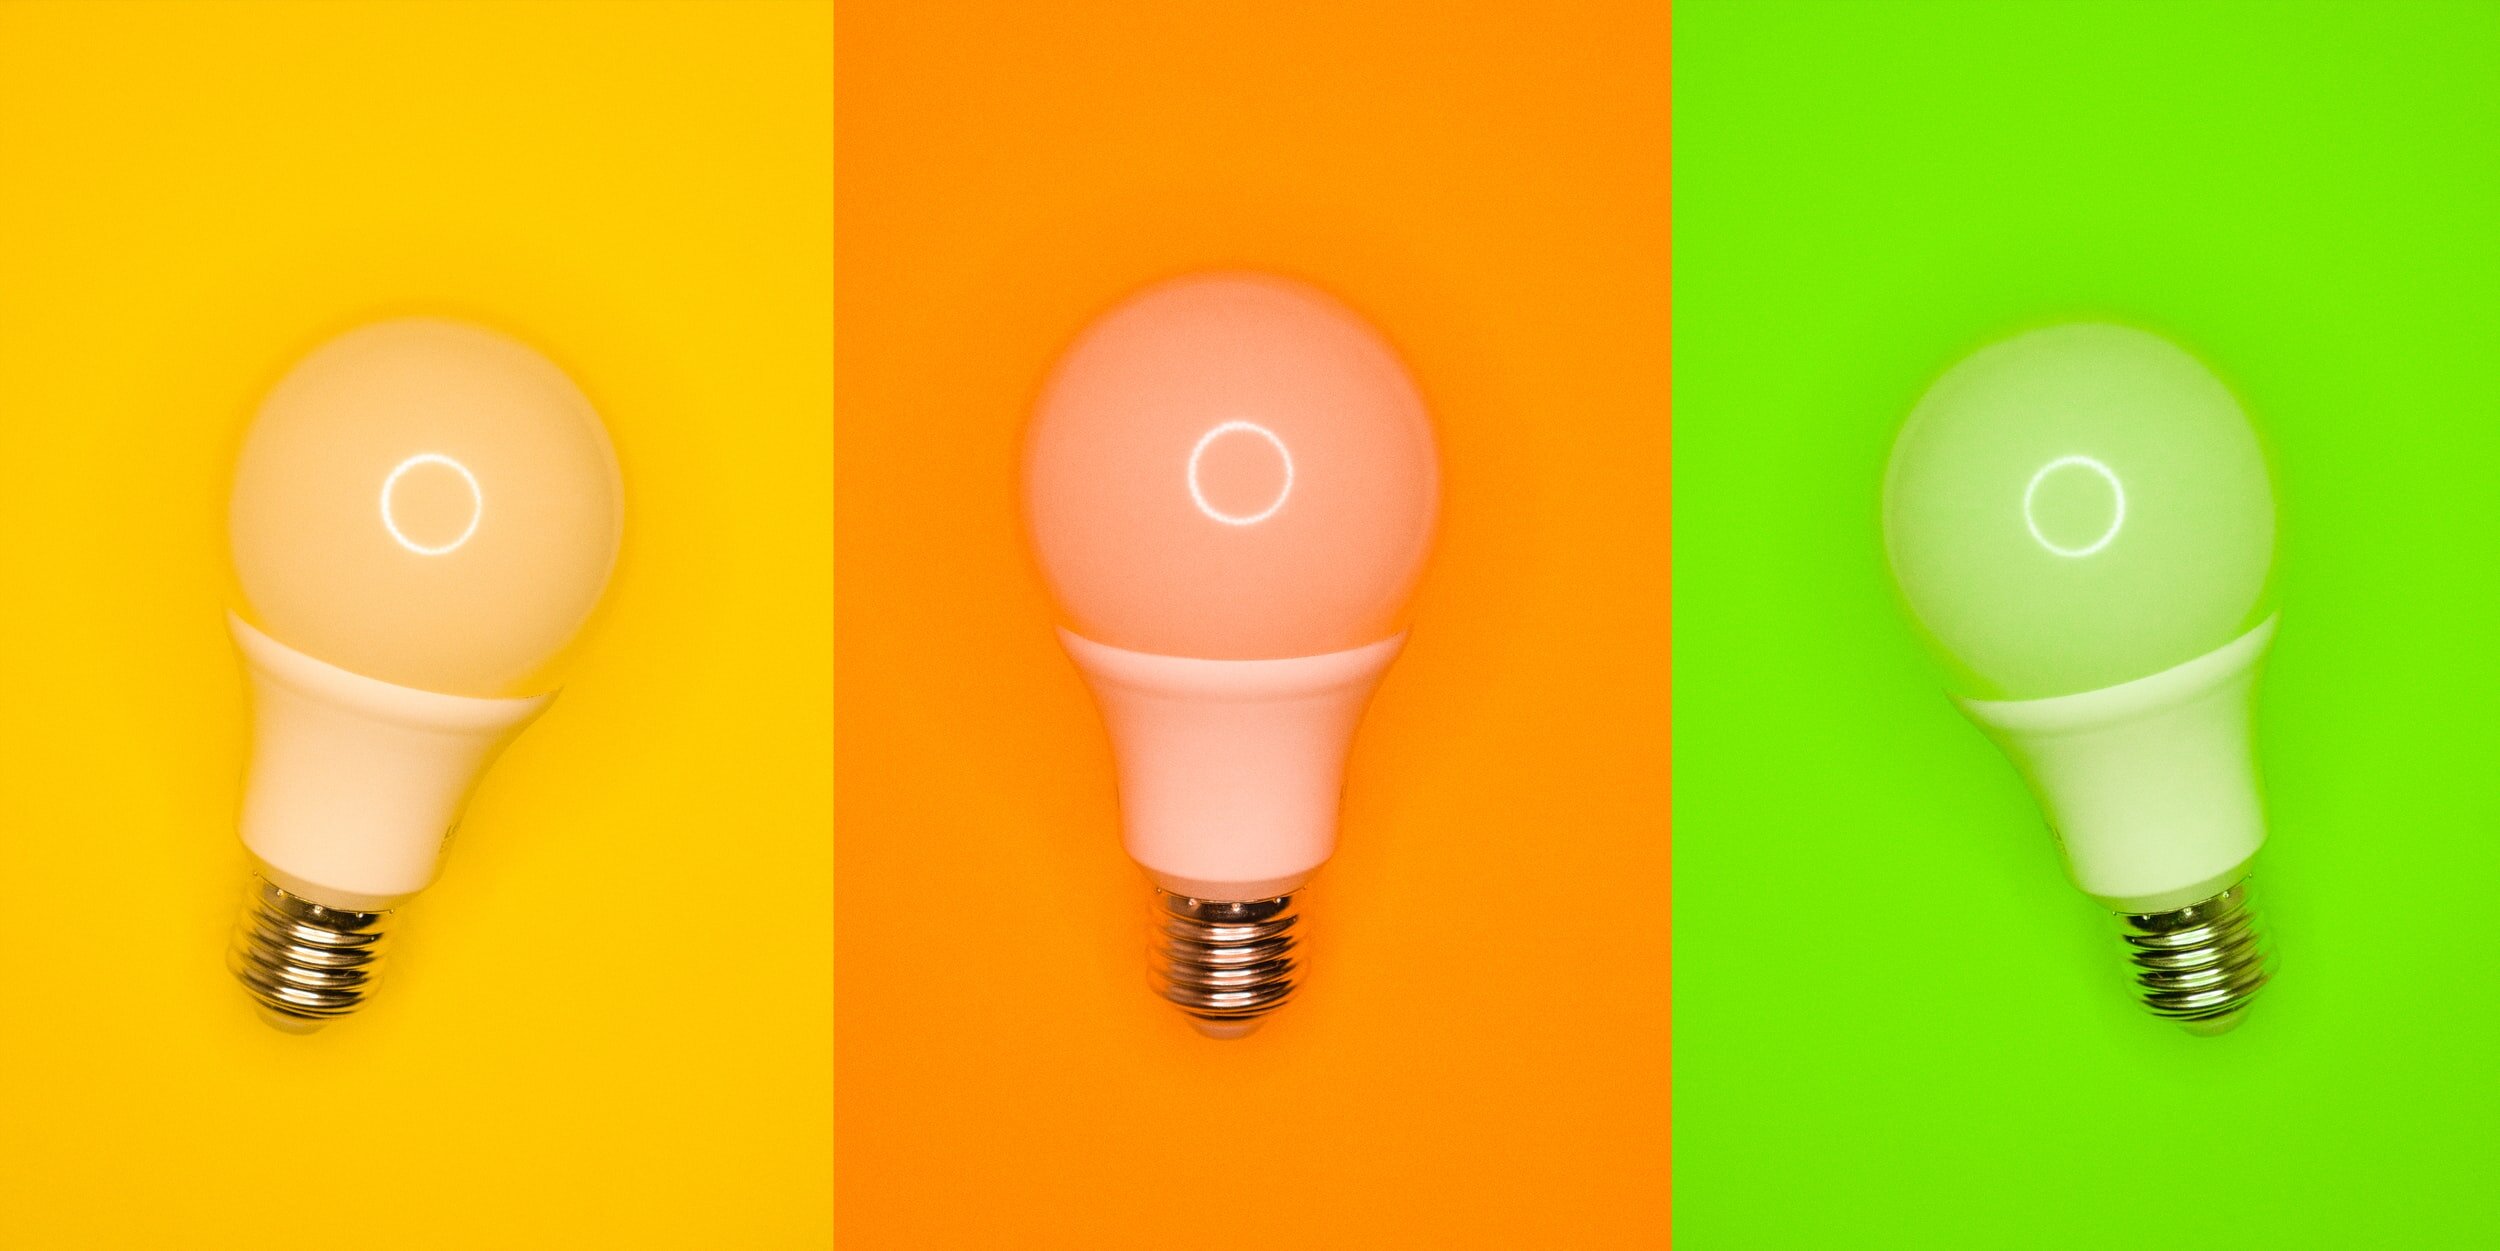 Three lightbulbs in different colors rest against matching backgrounds